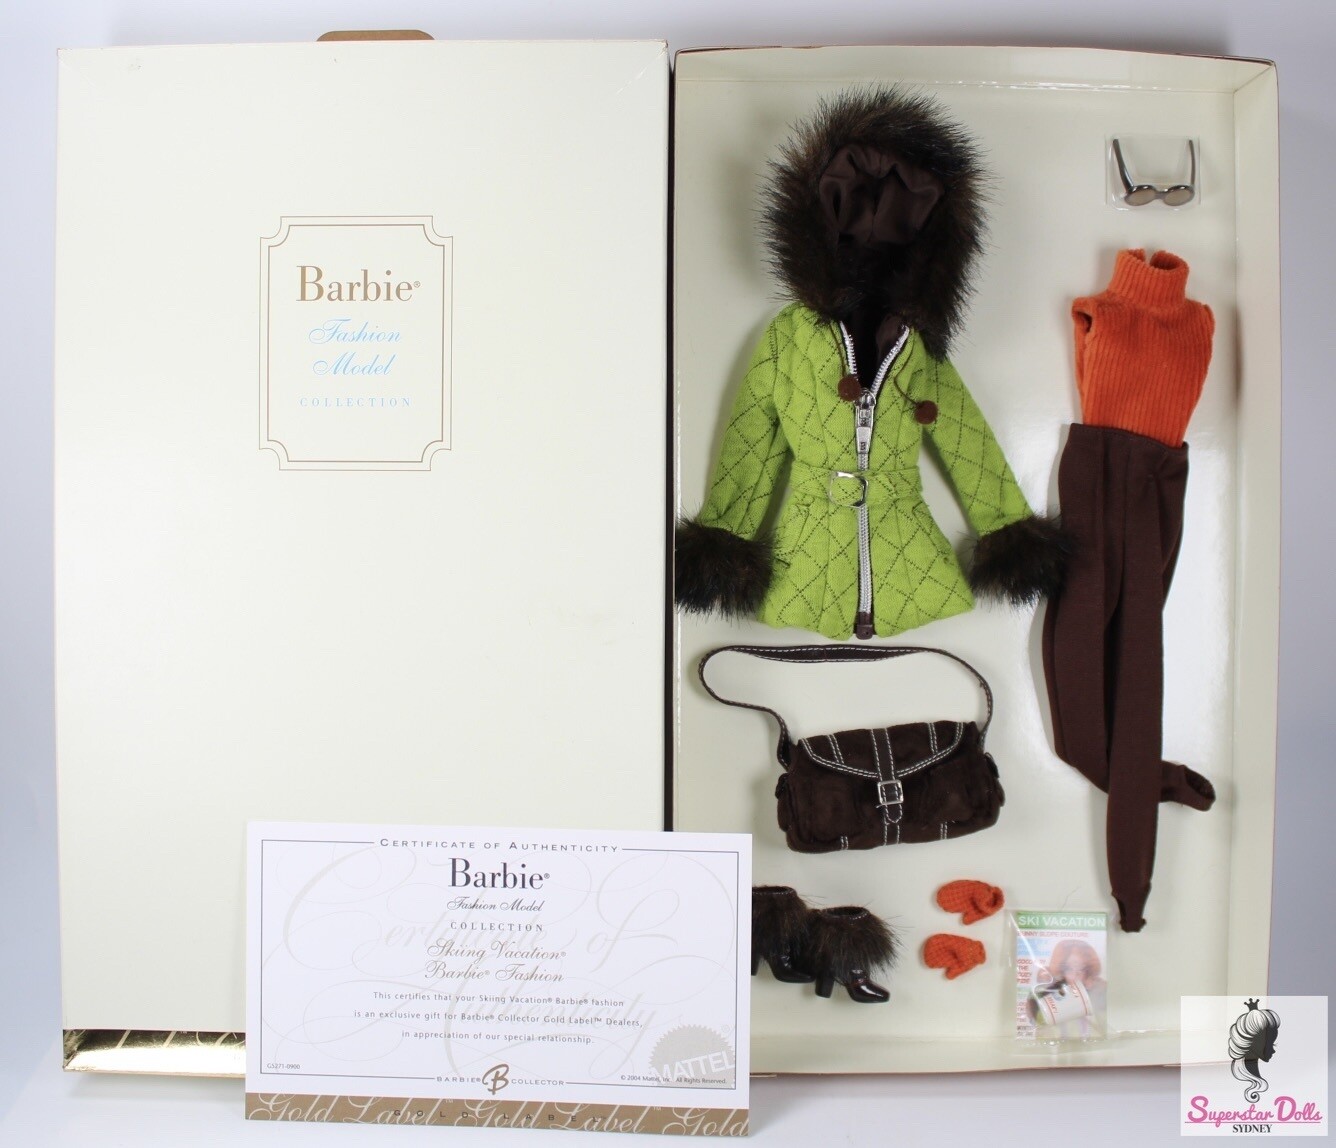 2004 Gold Label: "Skiing Vacation" Silkstone Barbie Doll Fashion Set From The Barbie Fashion Model Collection